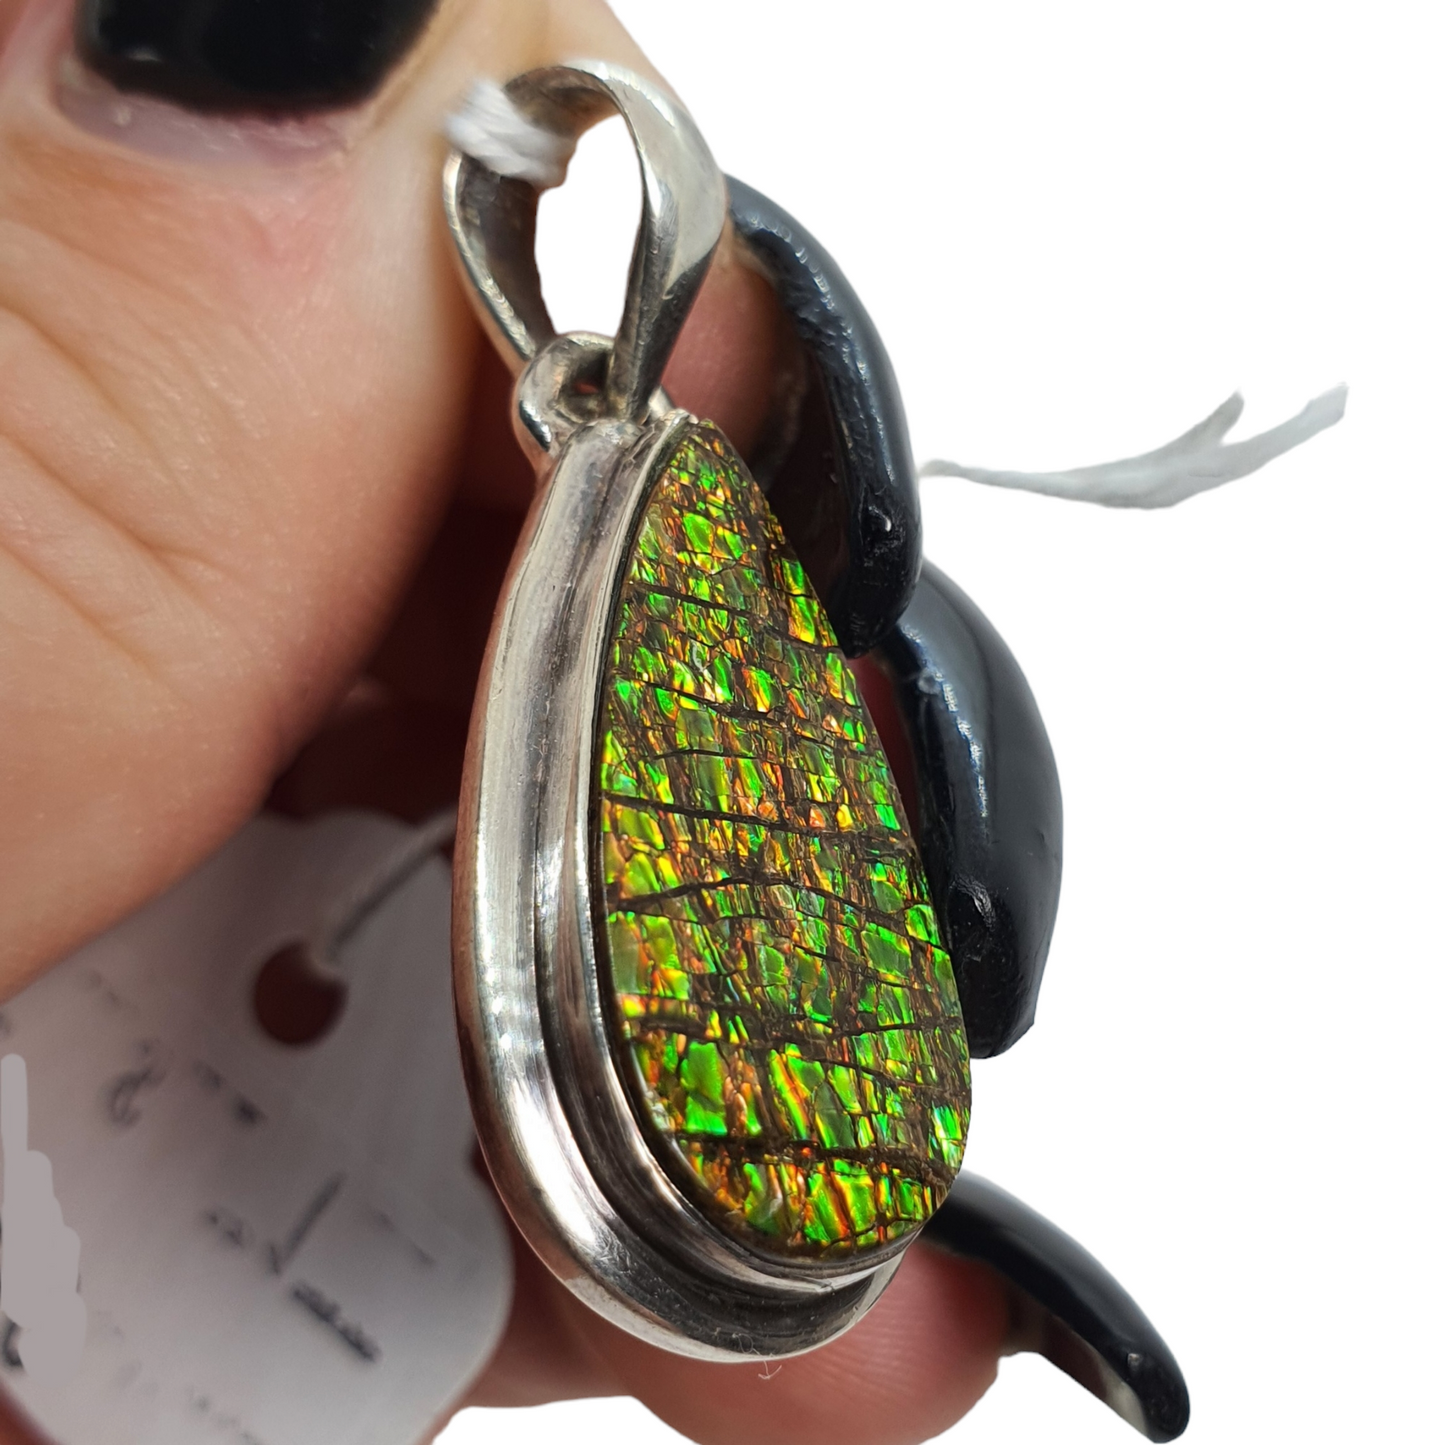 Crystals - Ammolite Pendant - Sterling Silver